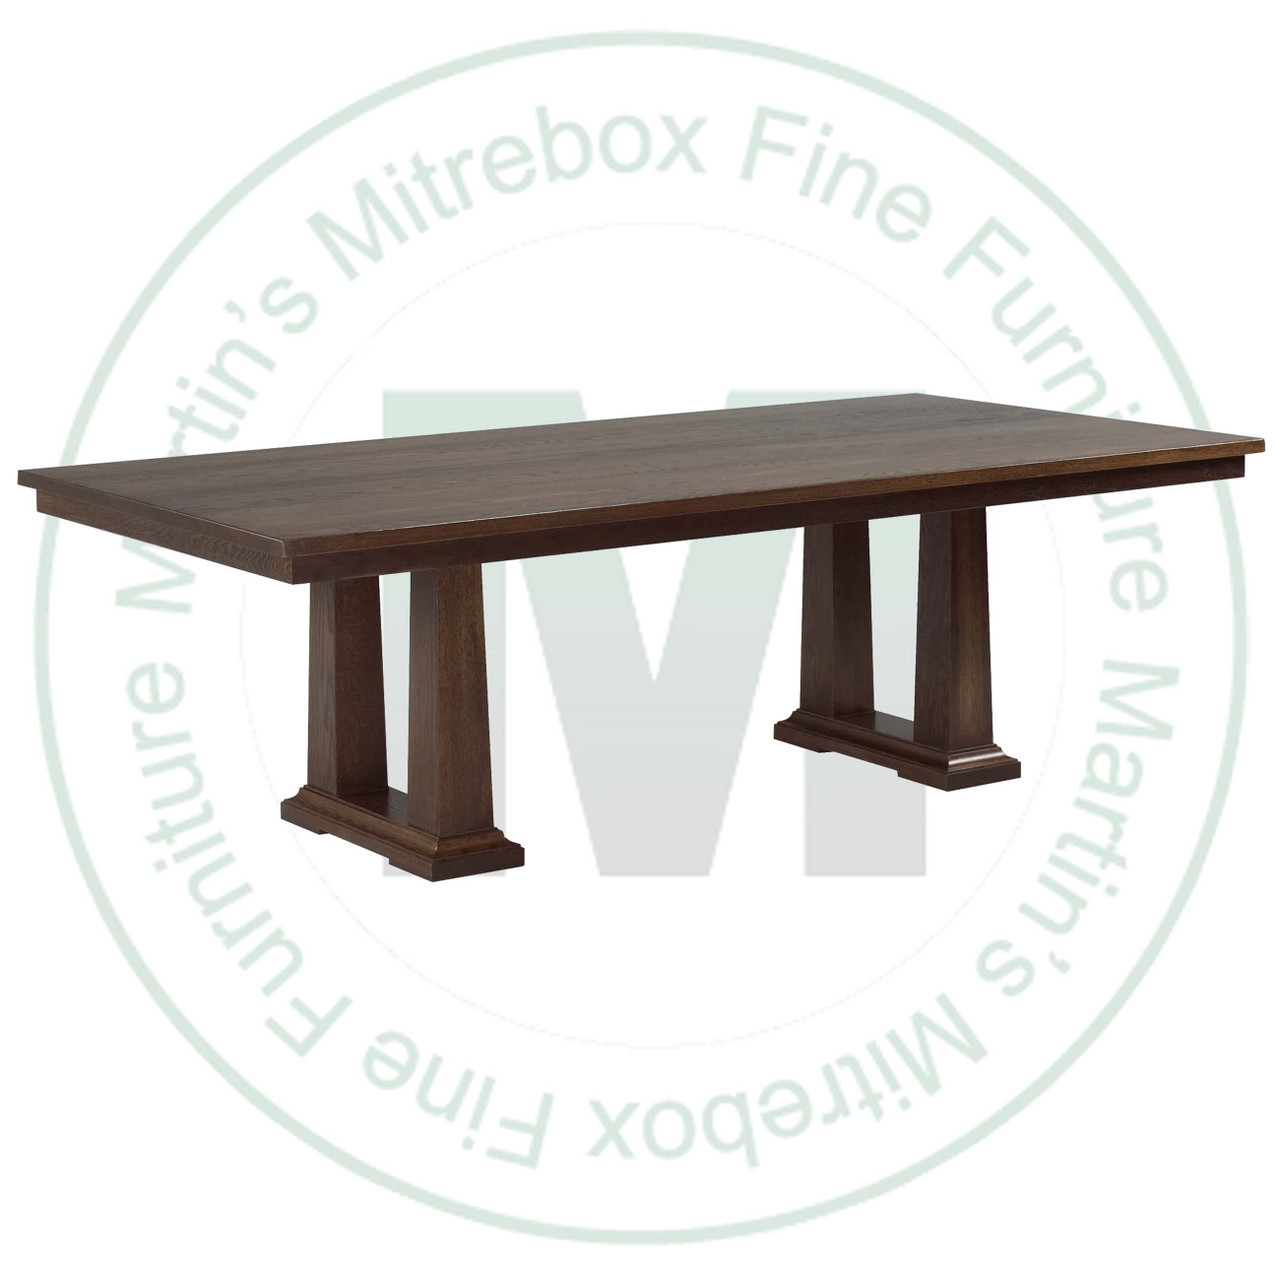 Maple Acropolis Solid Top Double Pedestal Table 54''D x 84''W x 30''H Table Has 1.25'' Thick Top With 16'' Extensions.